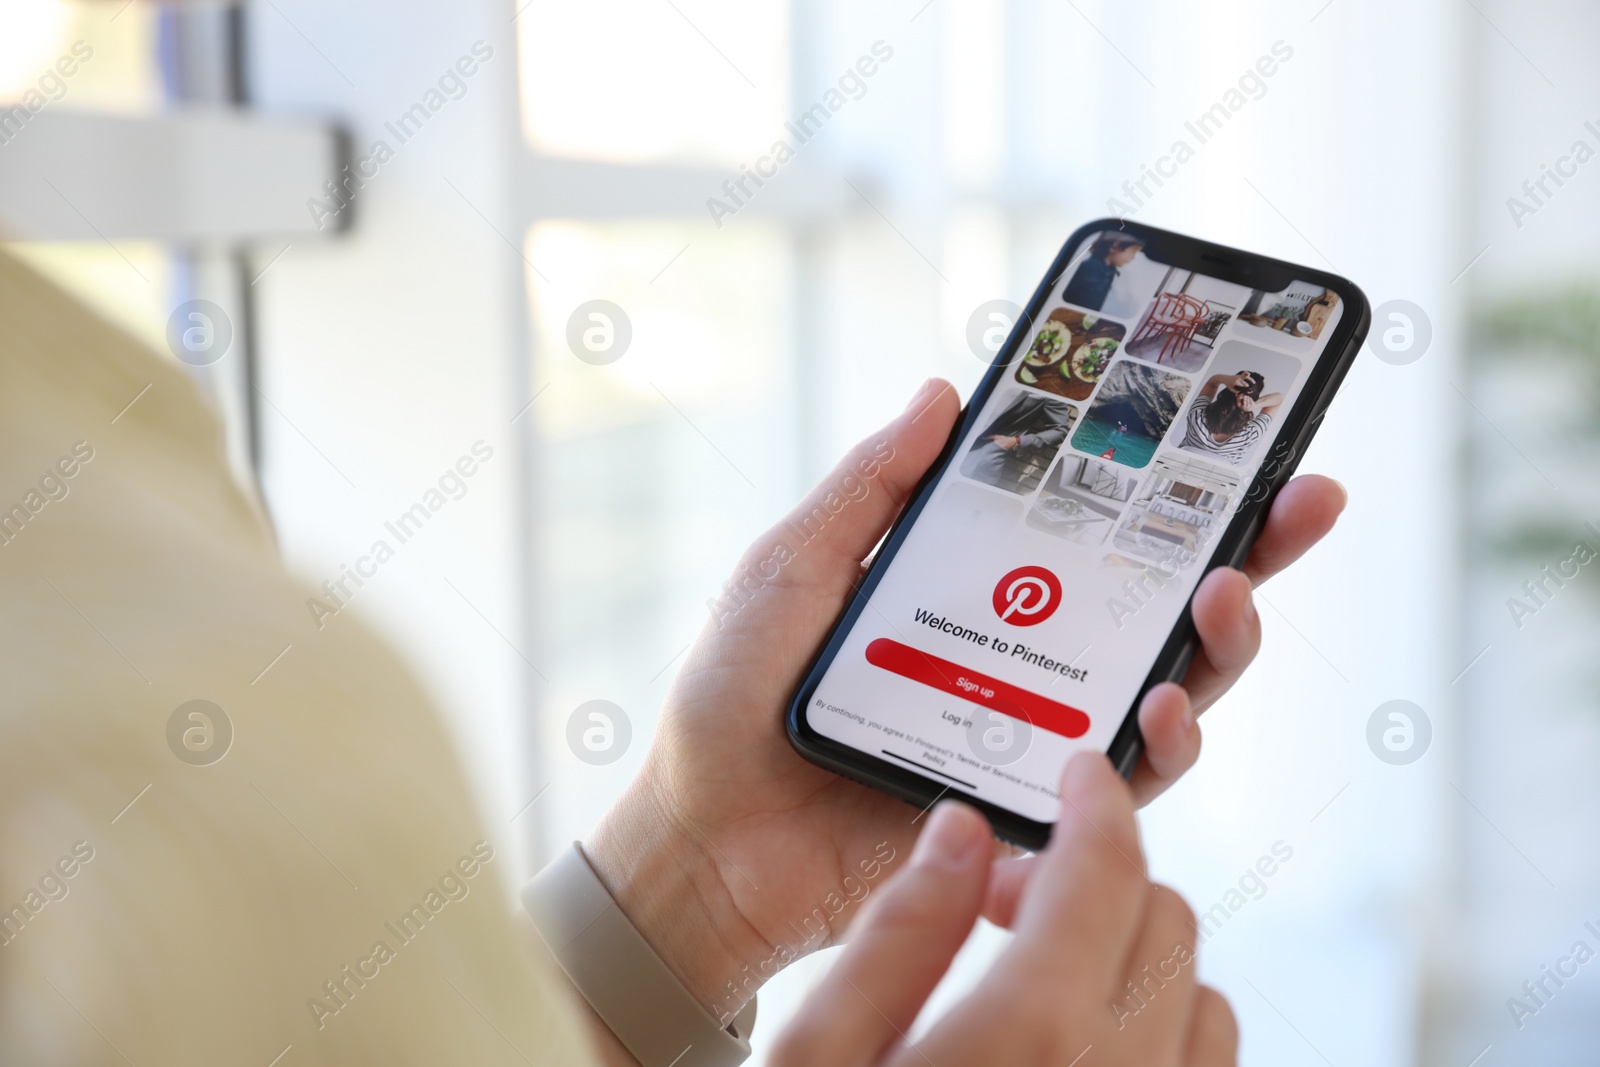 Photo of MYKOLAIV, UKRAINE - MARCH 16, 2020: Woman holding iPhone 11 with Pinterest app on screen indoors, closeup